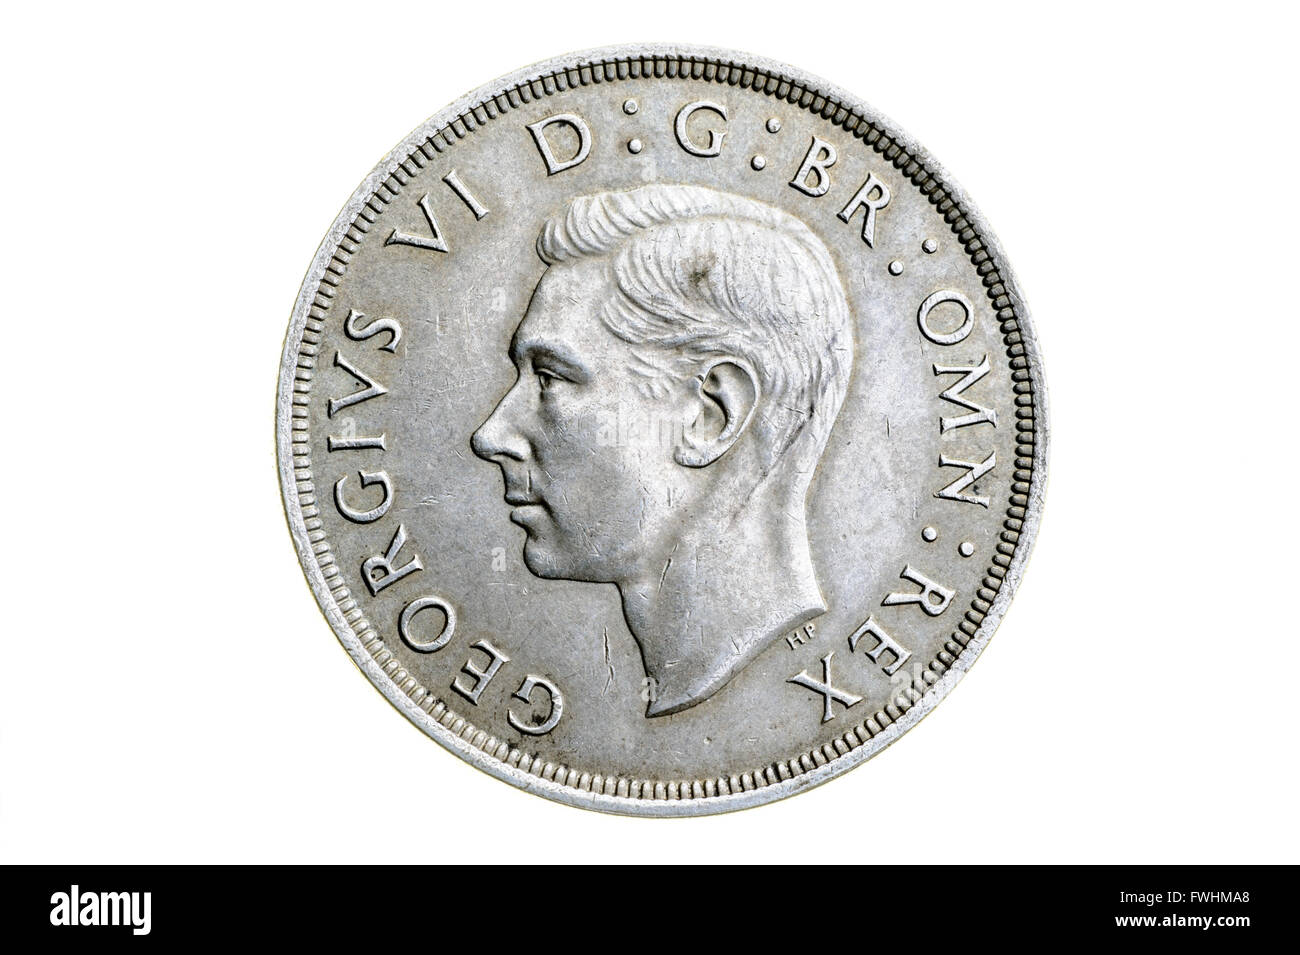 Old crown, pre decimal UK coinage. Stock Photo